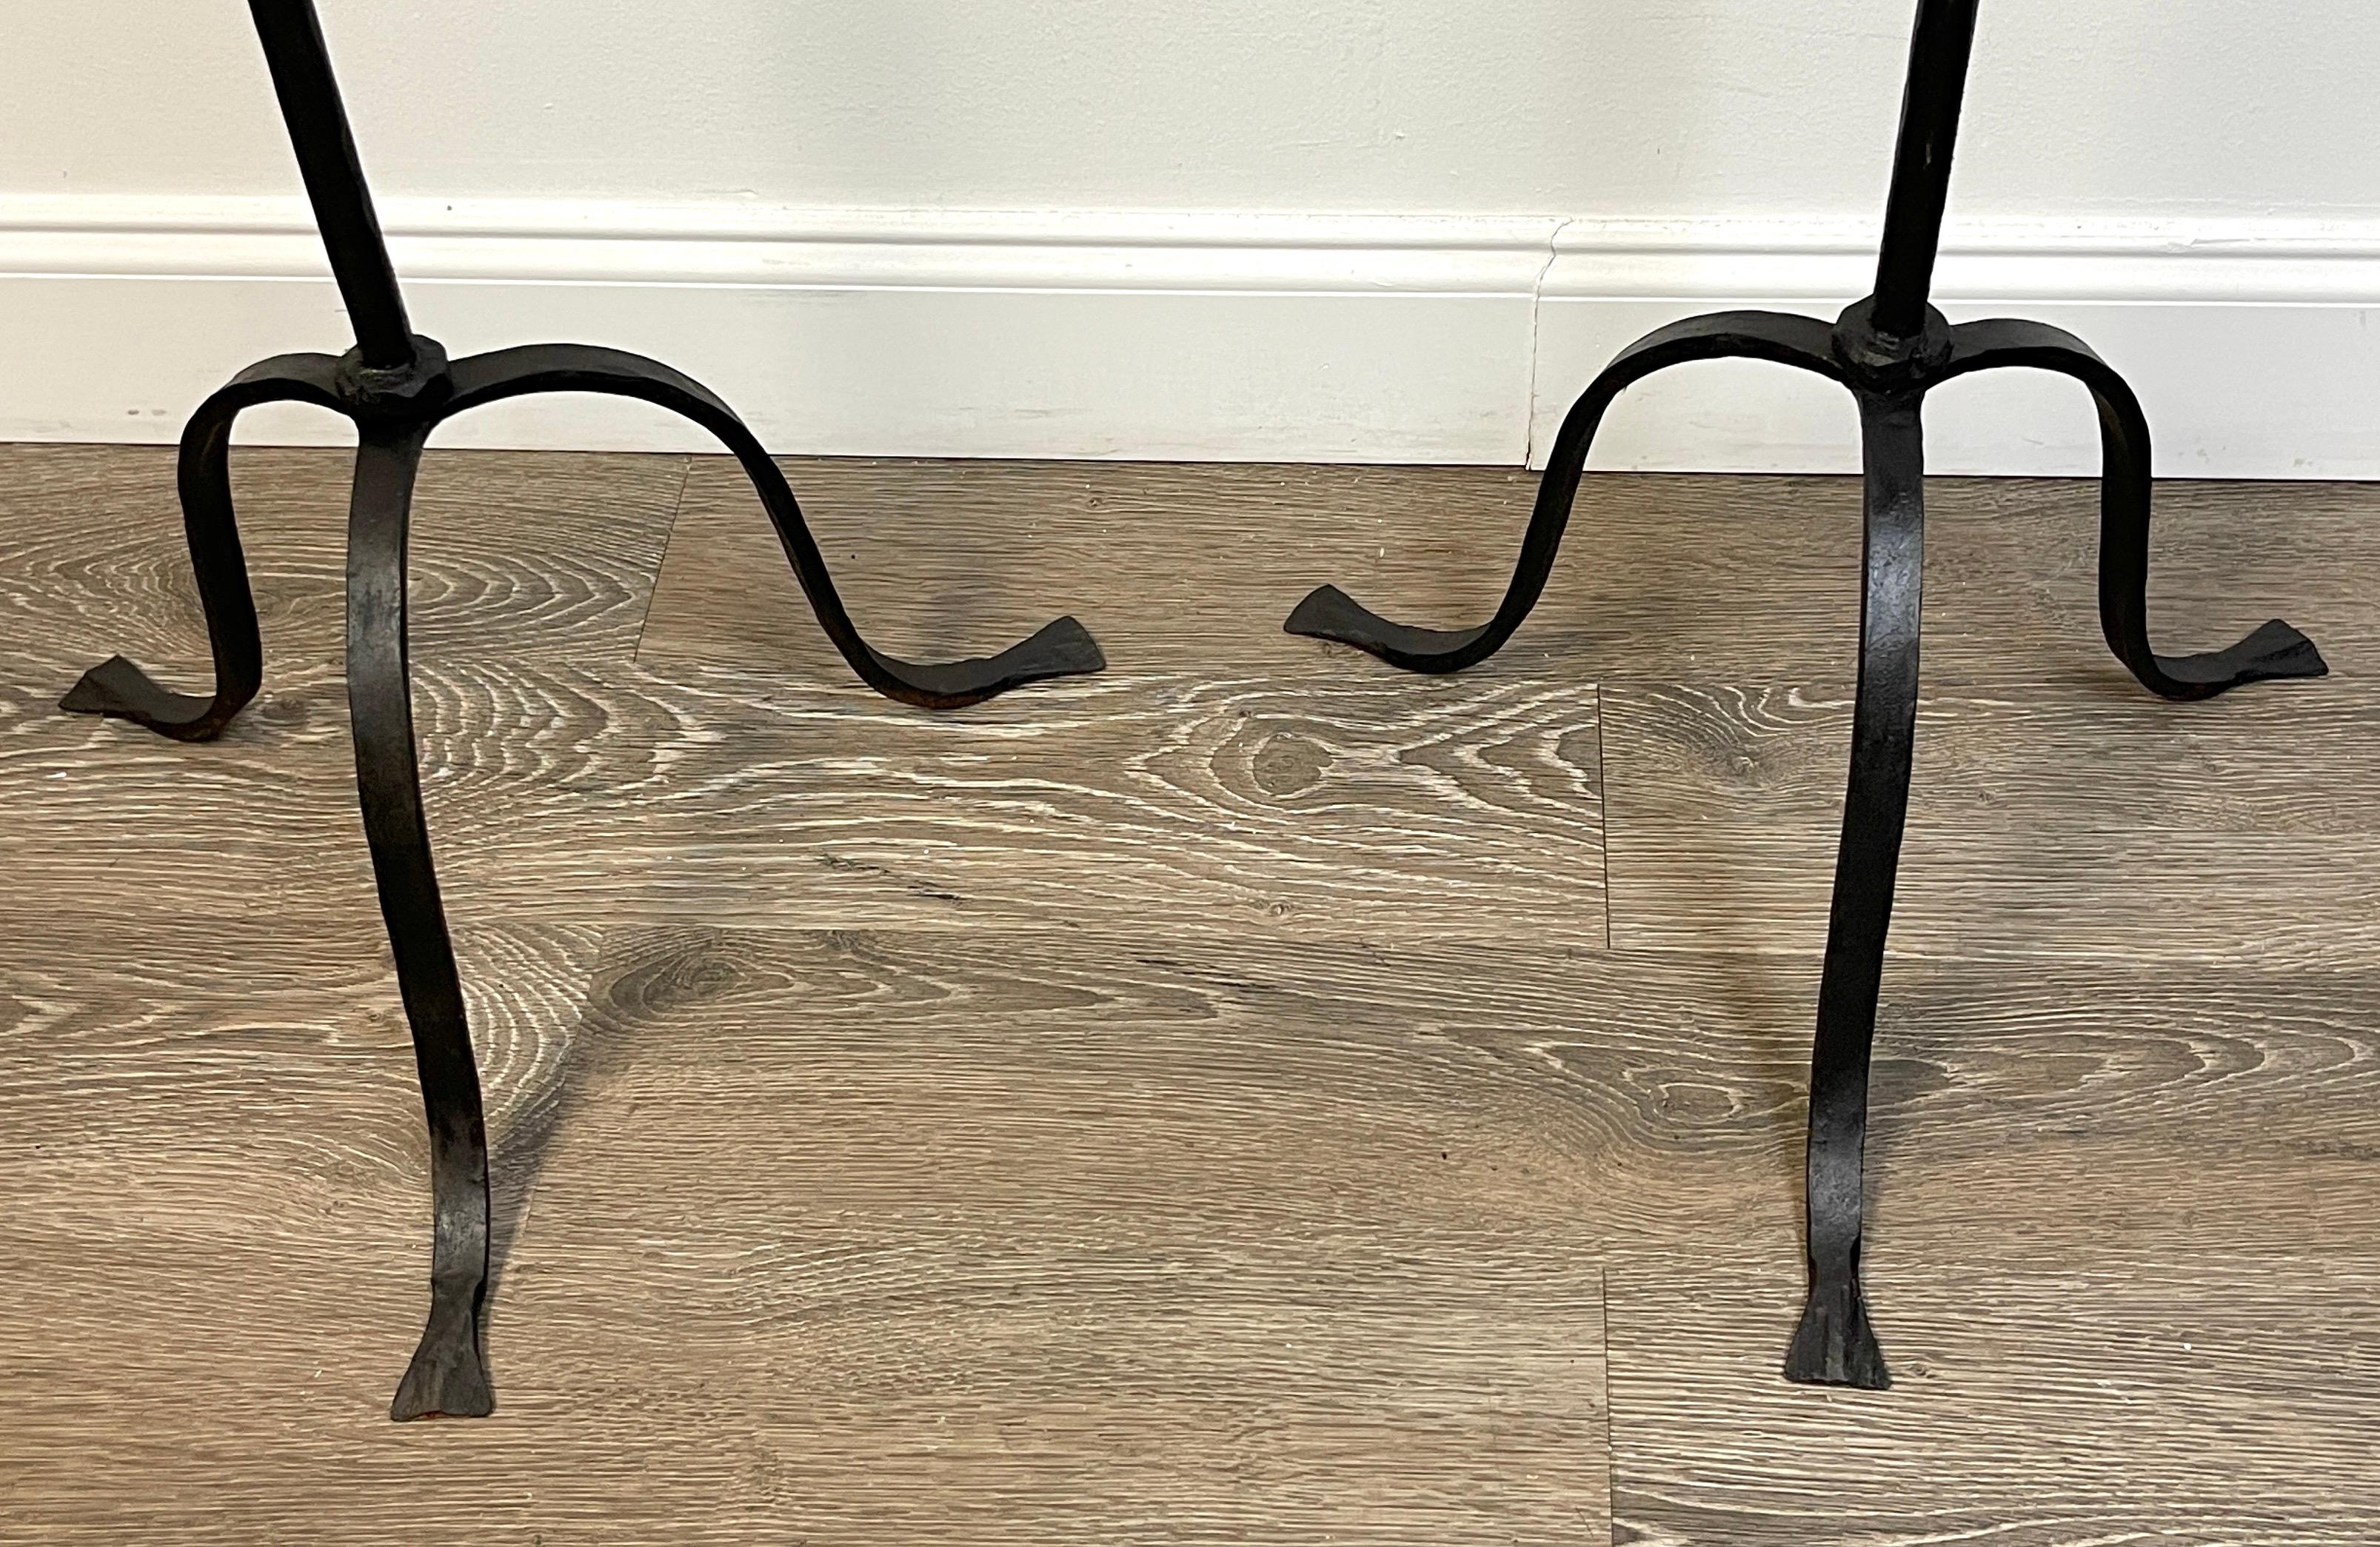 Pair of Addison Mizner, attributed wrought iron floor candelabra/ torcheres*
USA, Circa 1930s
Attributed to Addison Mizner (1872 -1933) 
Provenance: Palm Beach Estate

Each wrought iron floor candelabra/ torcheres is of exceptional proportions, with